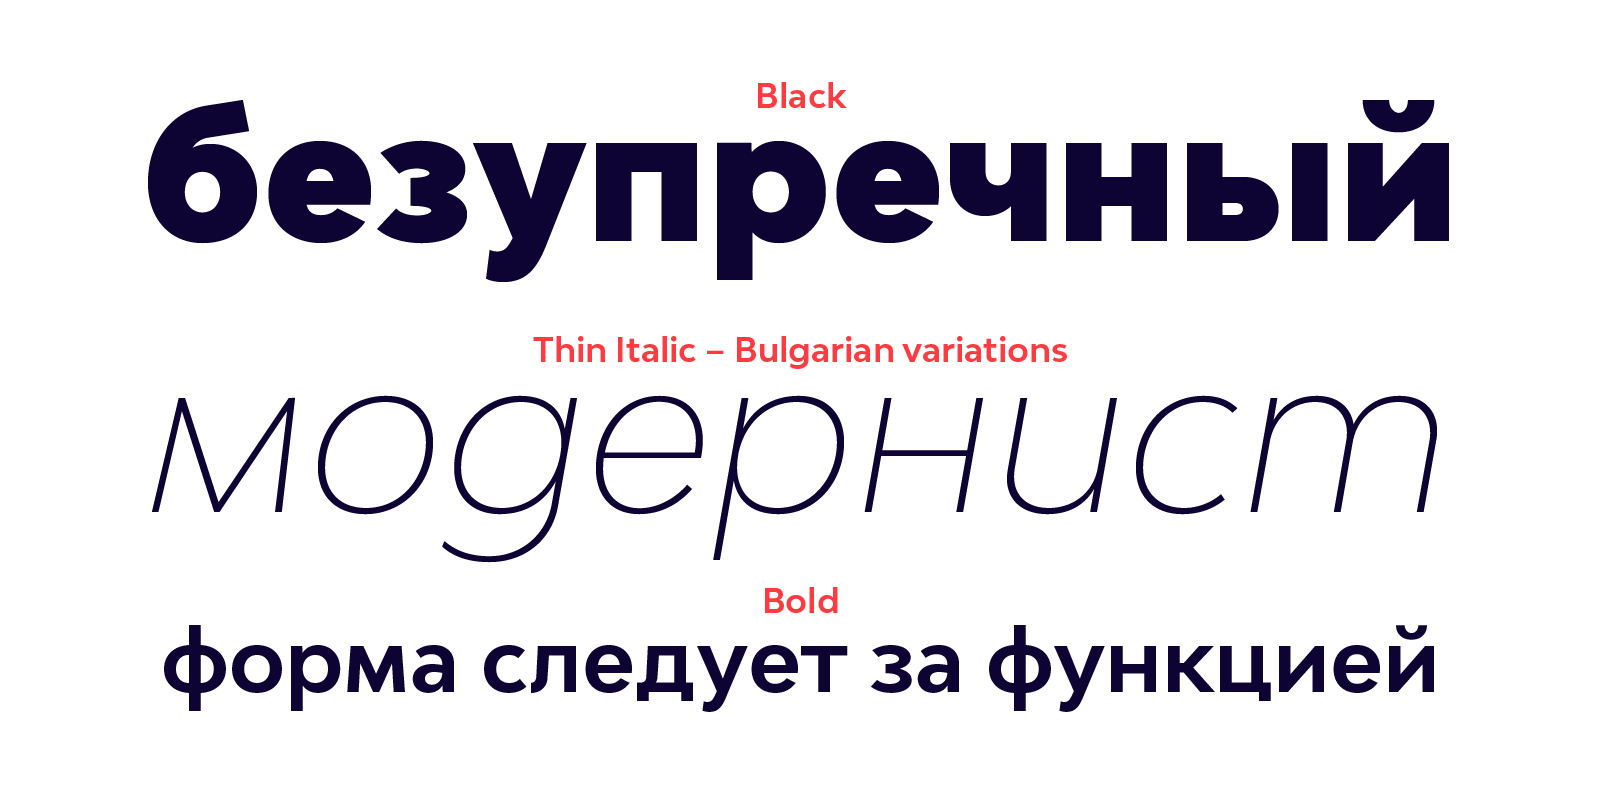 Bw Modelica Light Italic Font preview